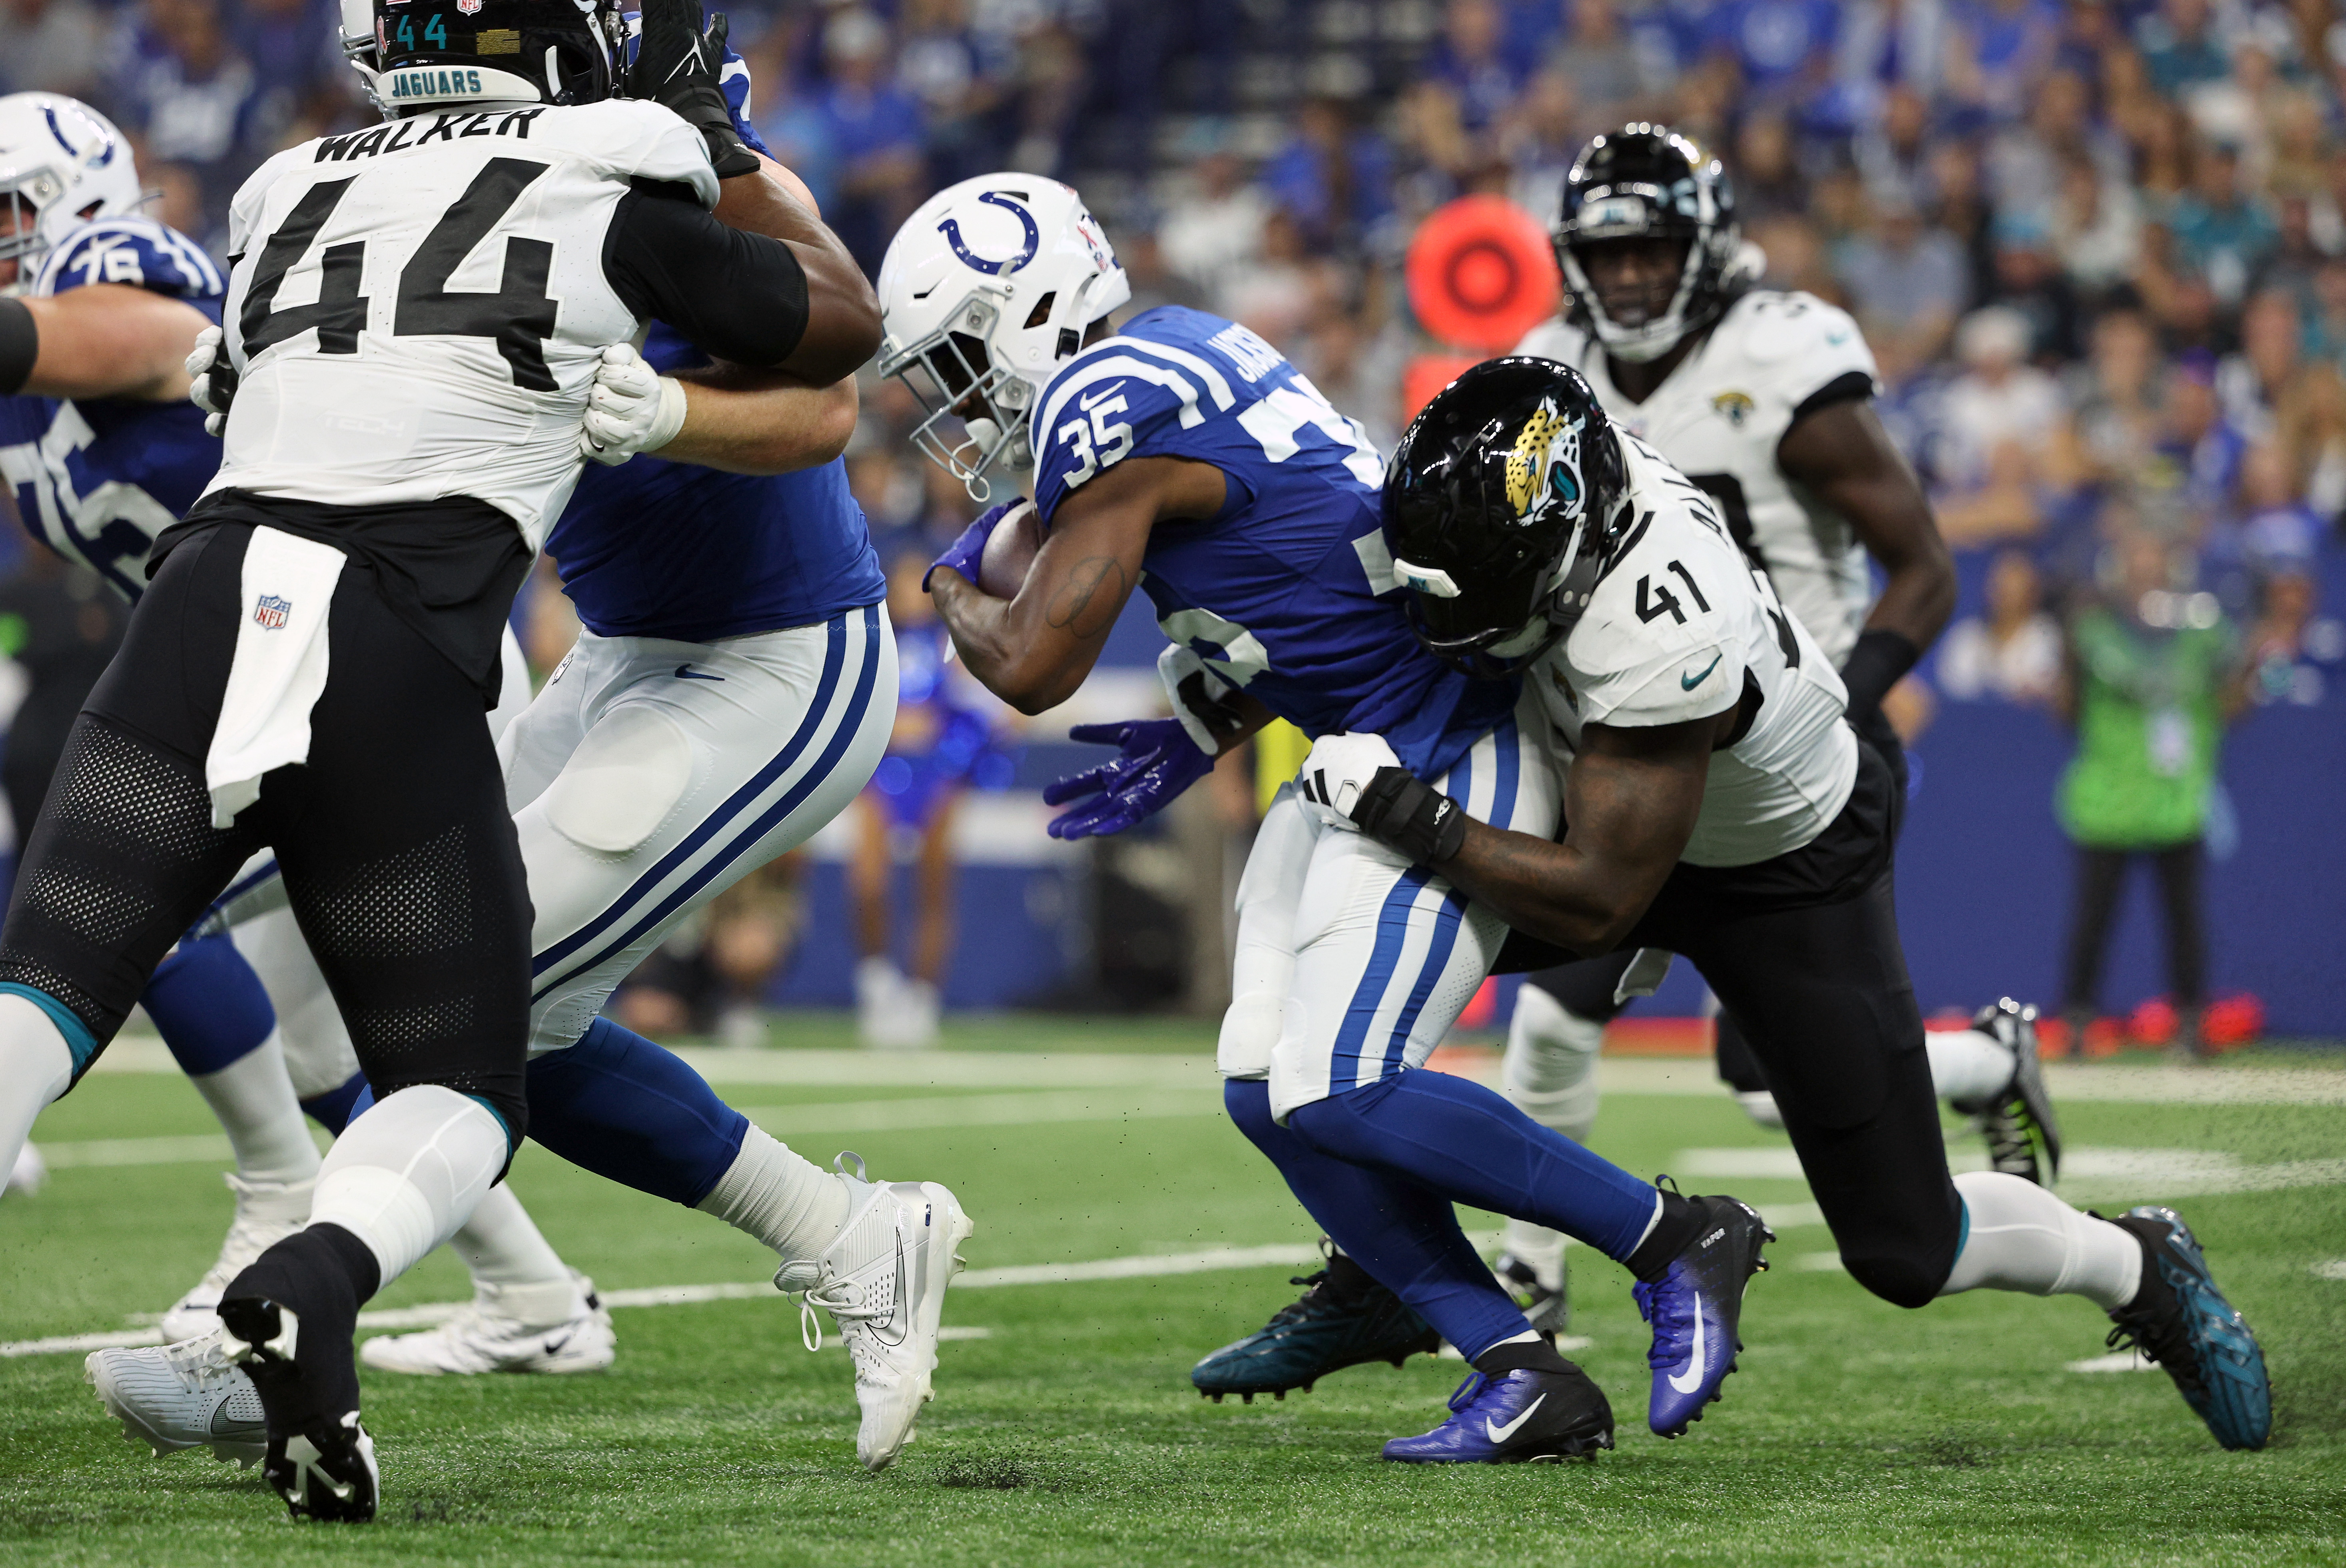 With 3 sacks against Colts, Jaguars pass rusher Josh Allen